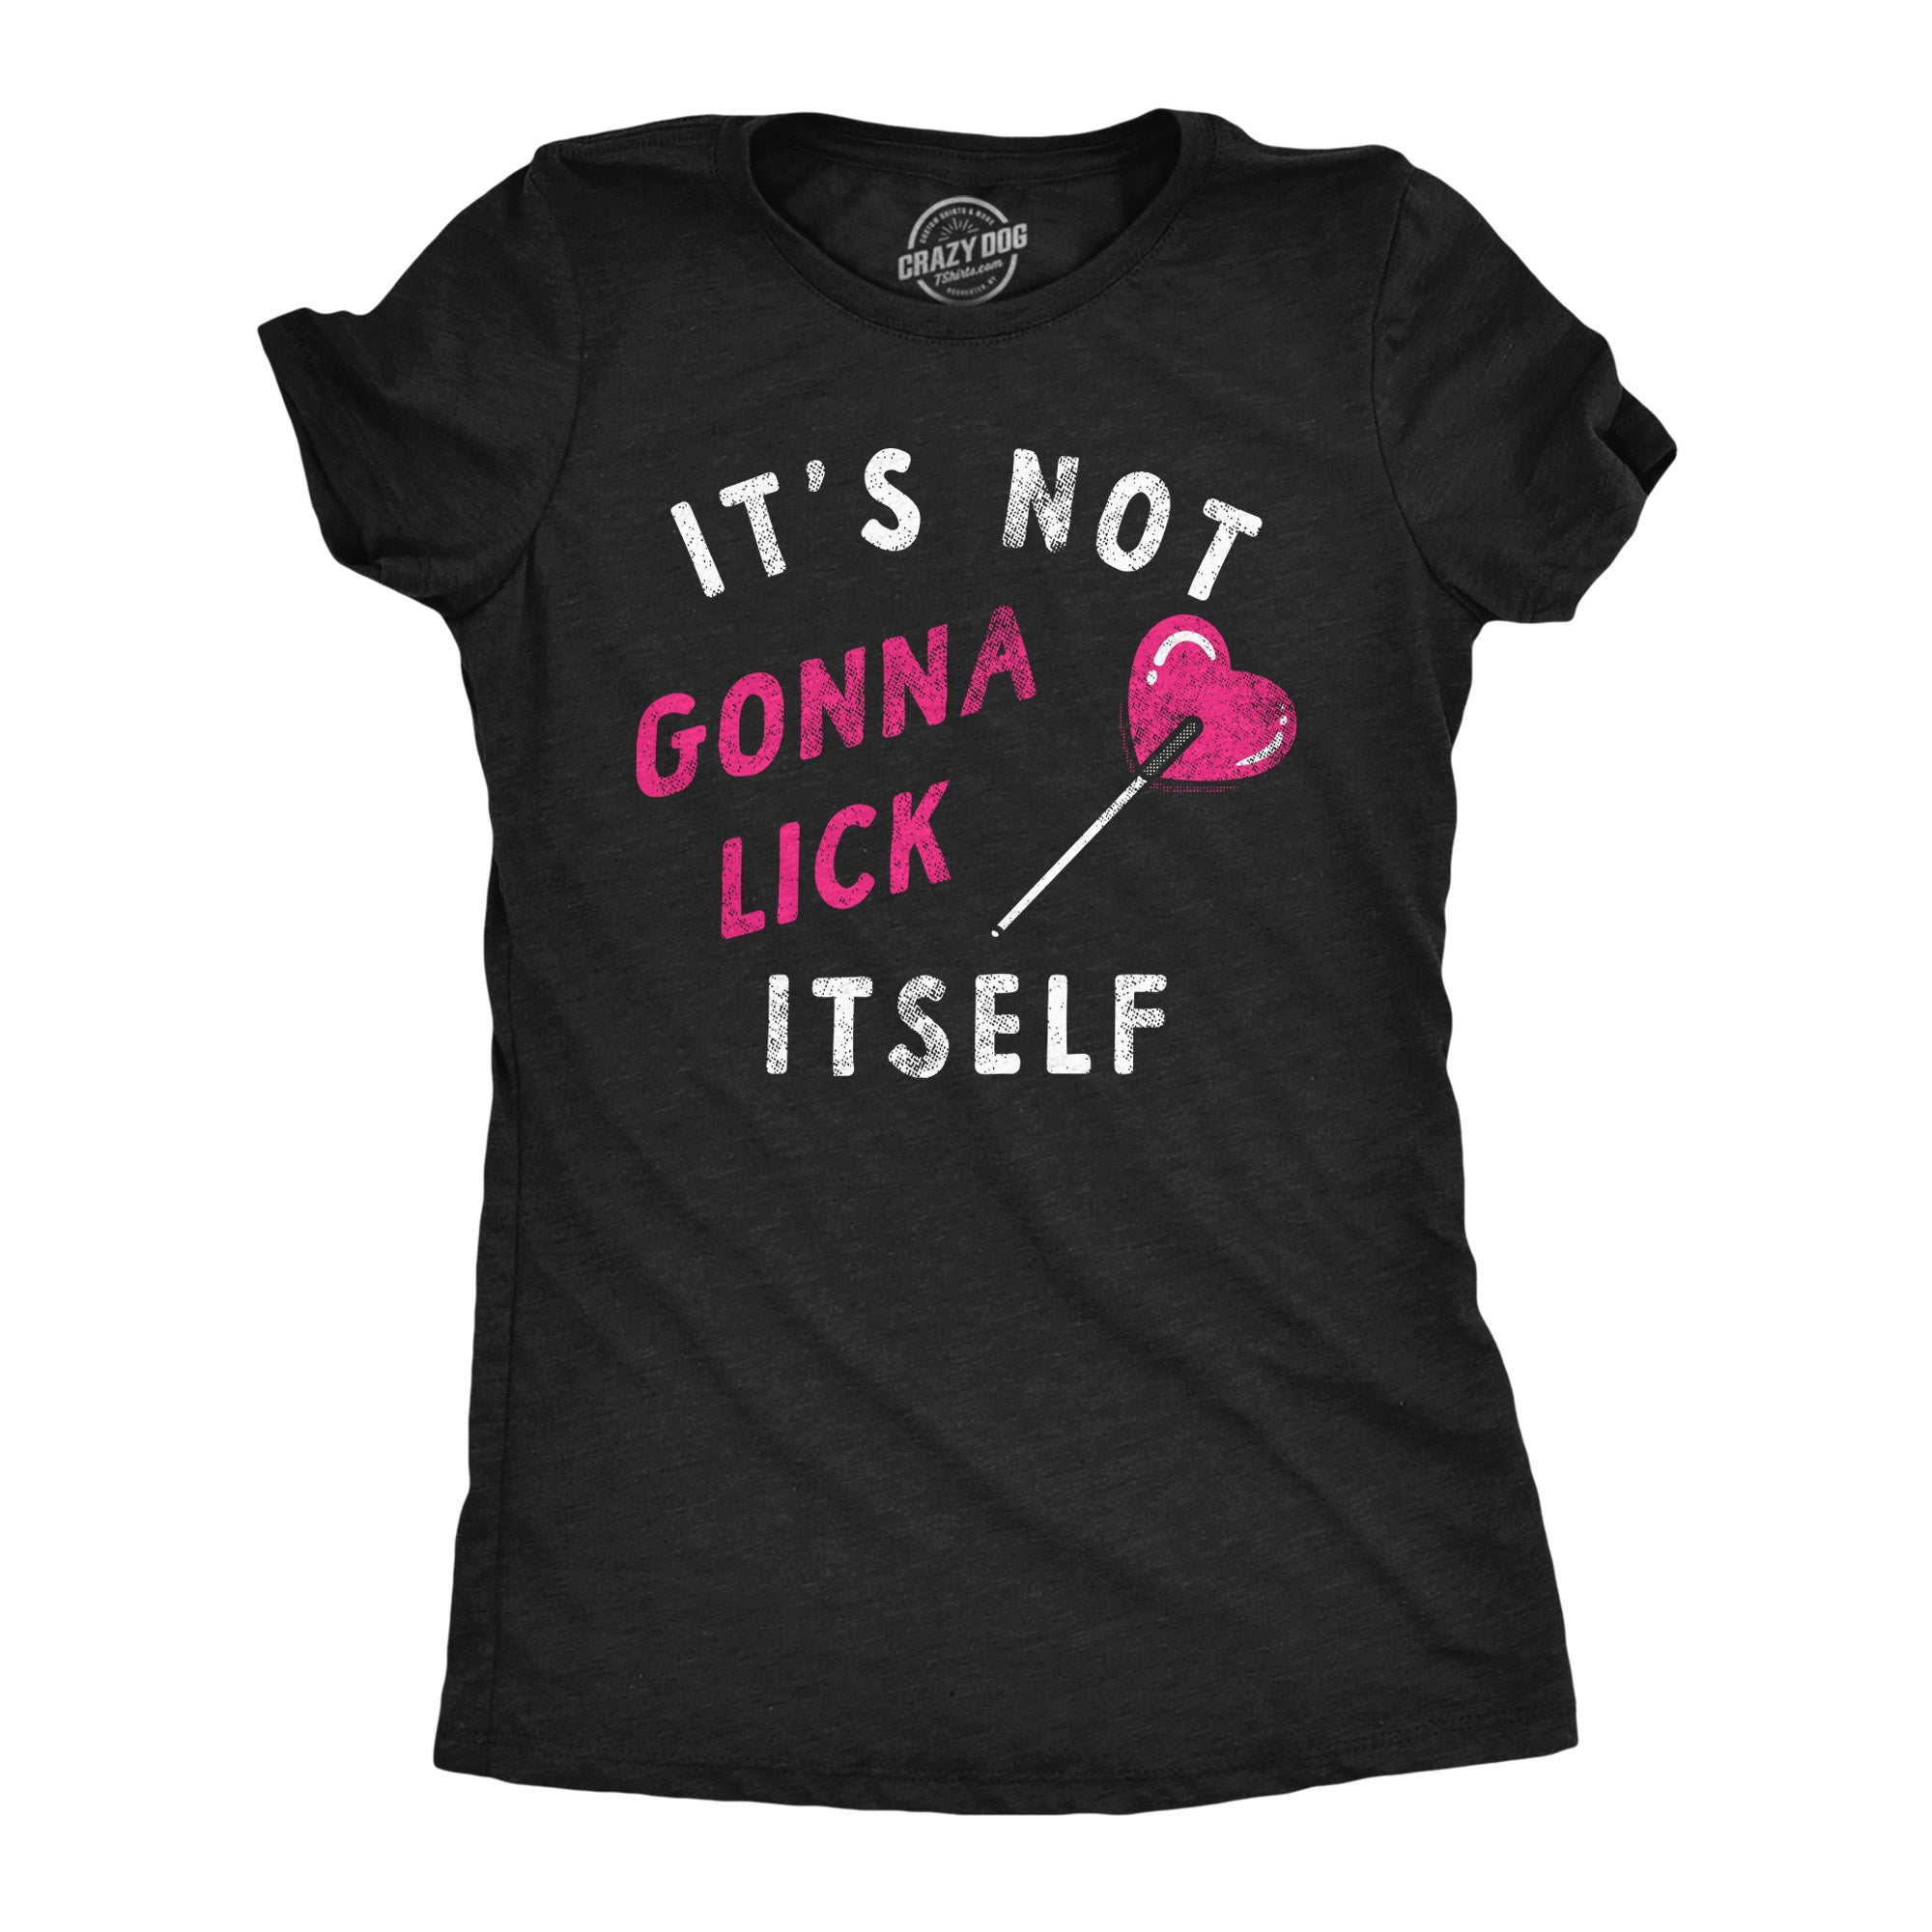 Funny Heather Black - Not Gonna Lick Itself Its Not Gonna Lick Itself Womens T Shirt Nerdy Valentine's Day Sarcastic Tee